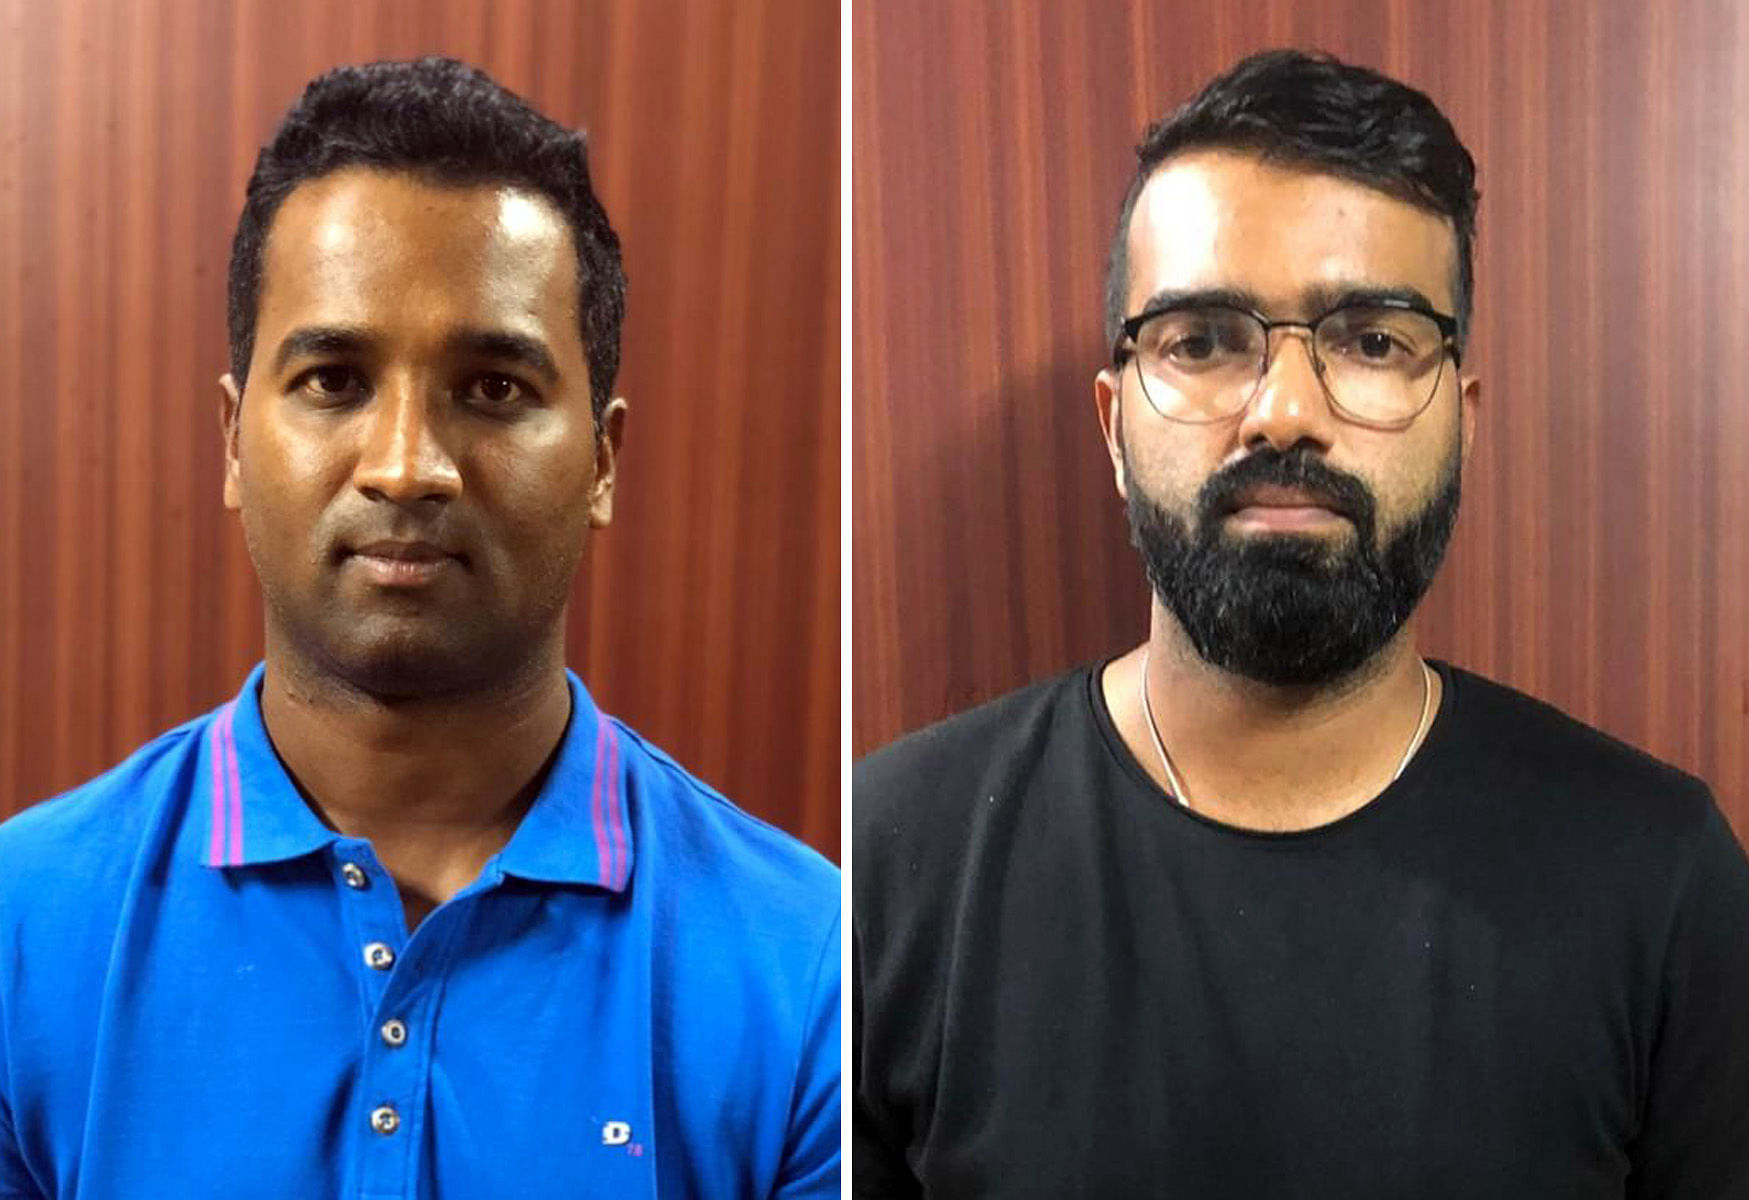 Bellary Tuskers team captain C M Gautum and player Abrar Kazi were arrested after the detailed interrogation and findings that both were involved in the spot fixing during KPL 2019 final match between Hubli Vs Bellary. They were paid Rs 20 lakh for slow batting and for other things. Also duo fixed another match against Bengaluru team in the KPL. (DH Photo)